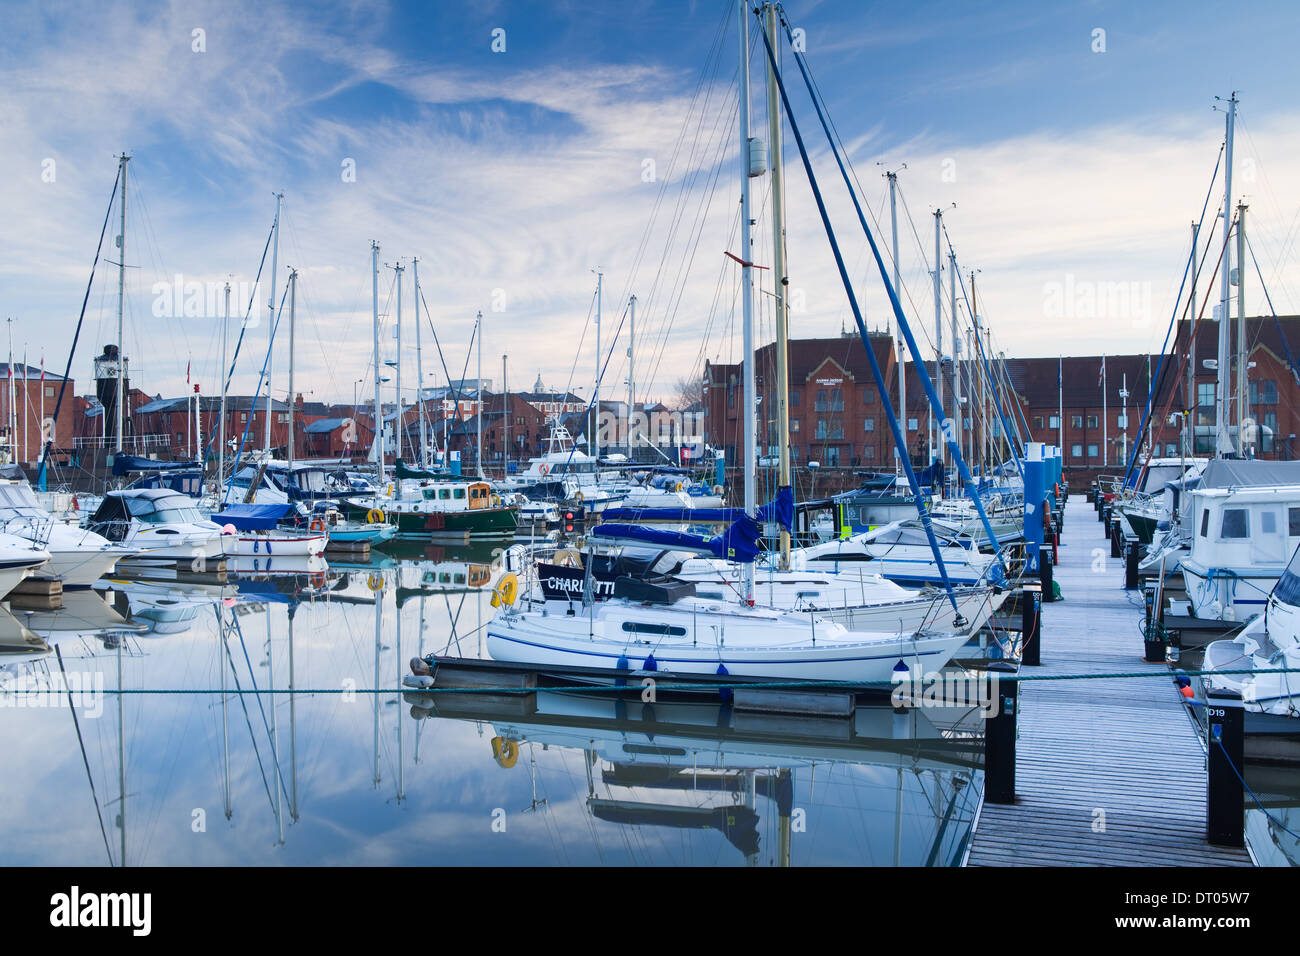 Hull Marina in the city of Hull (Kingston-upon-Hull) in the East Riding of Yorkshire, England, UK. Stock Photo